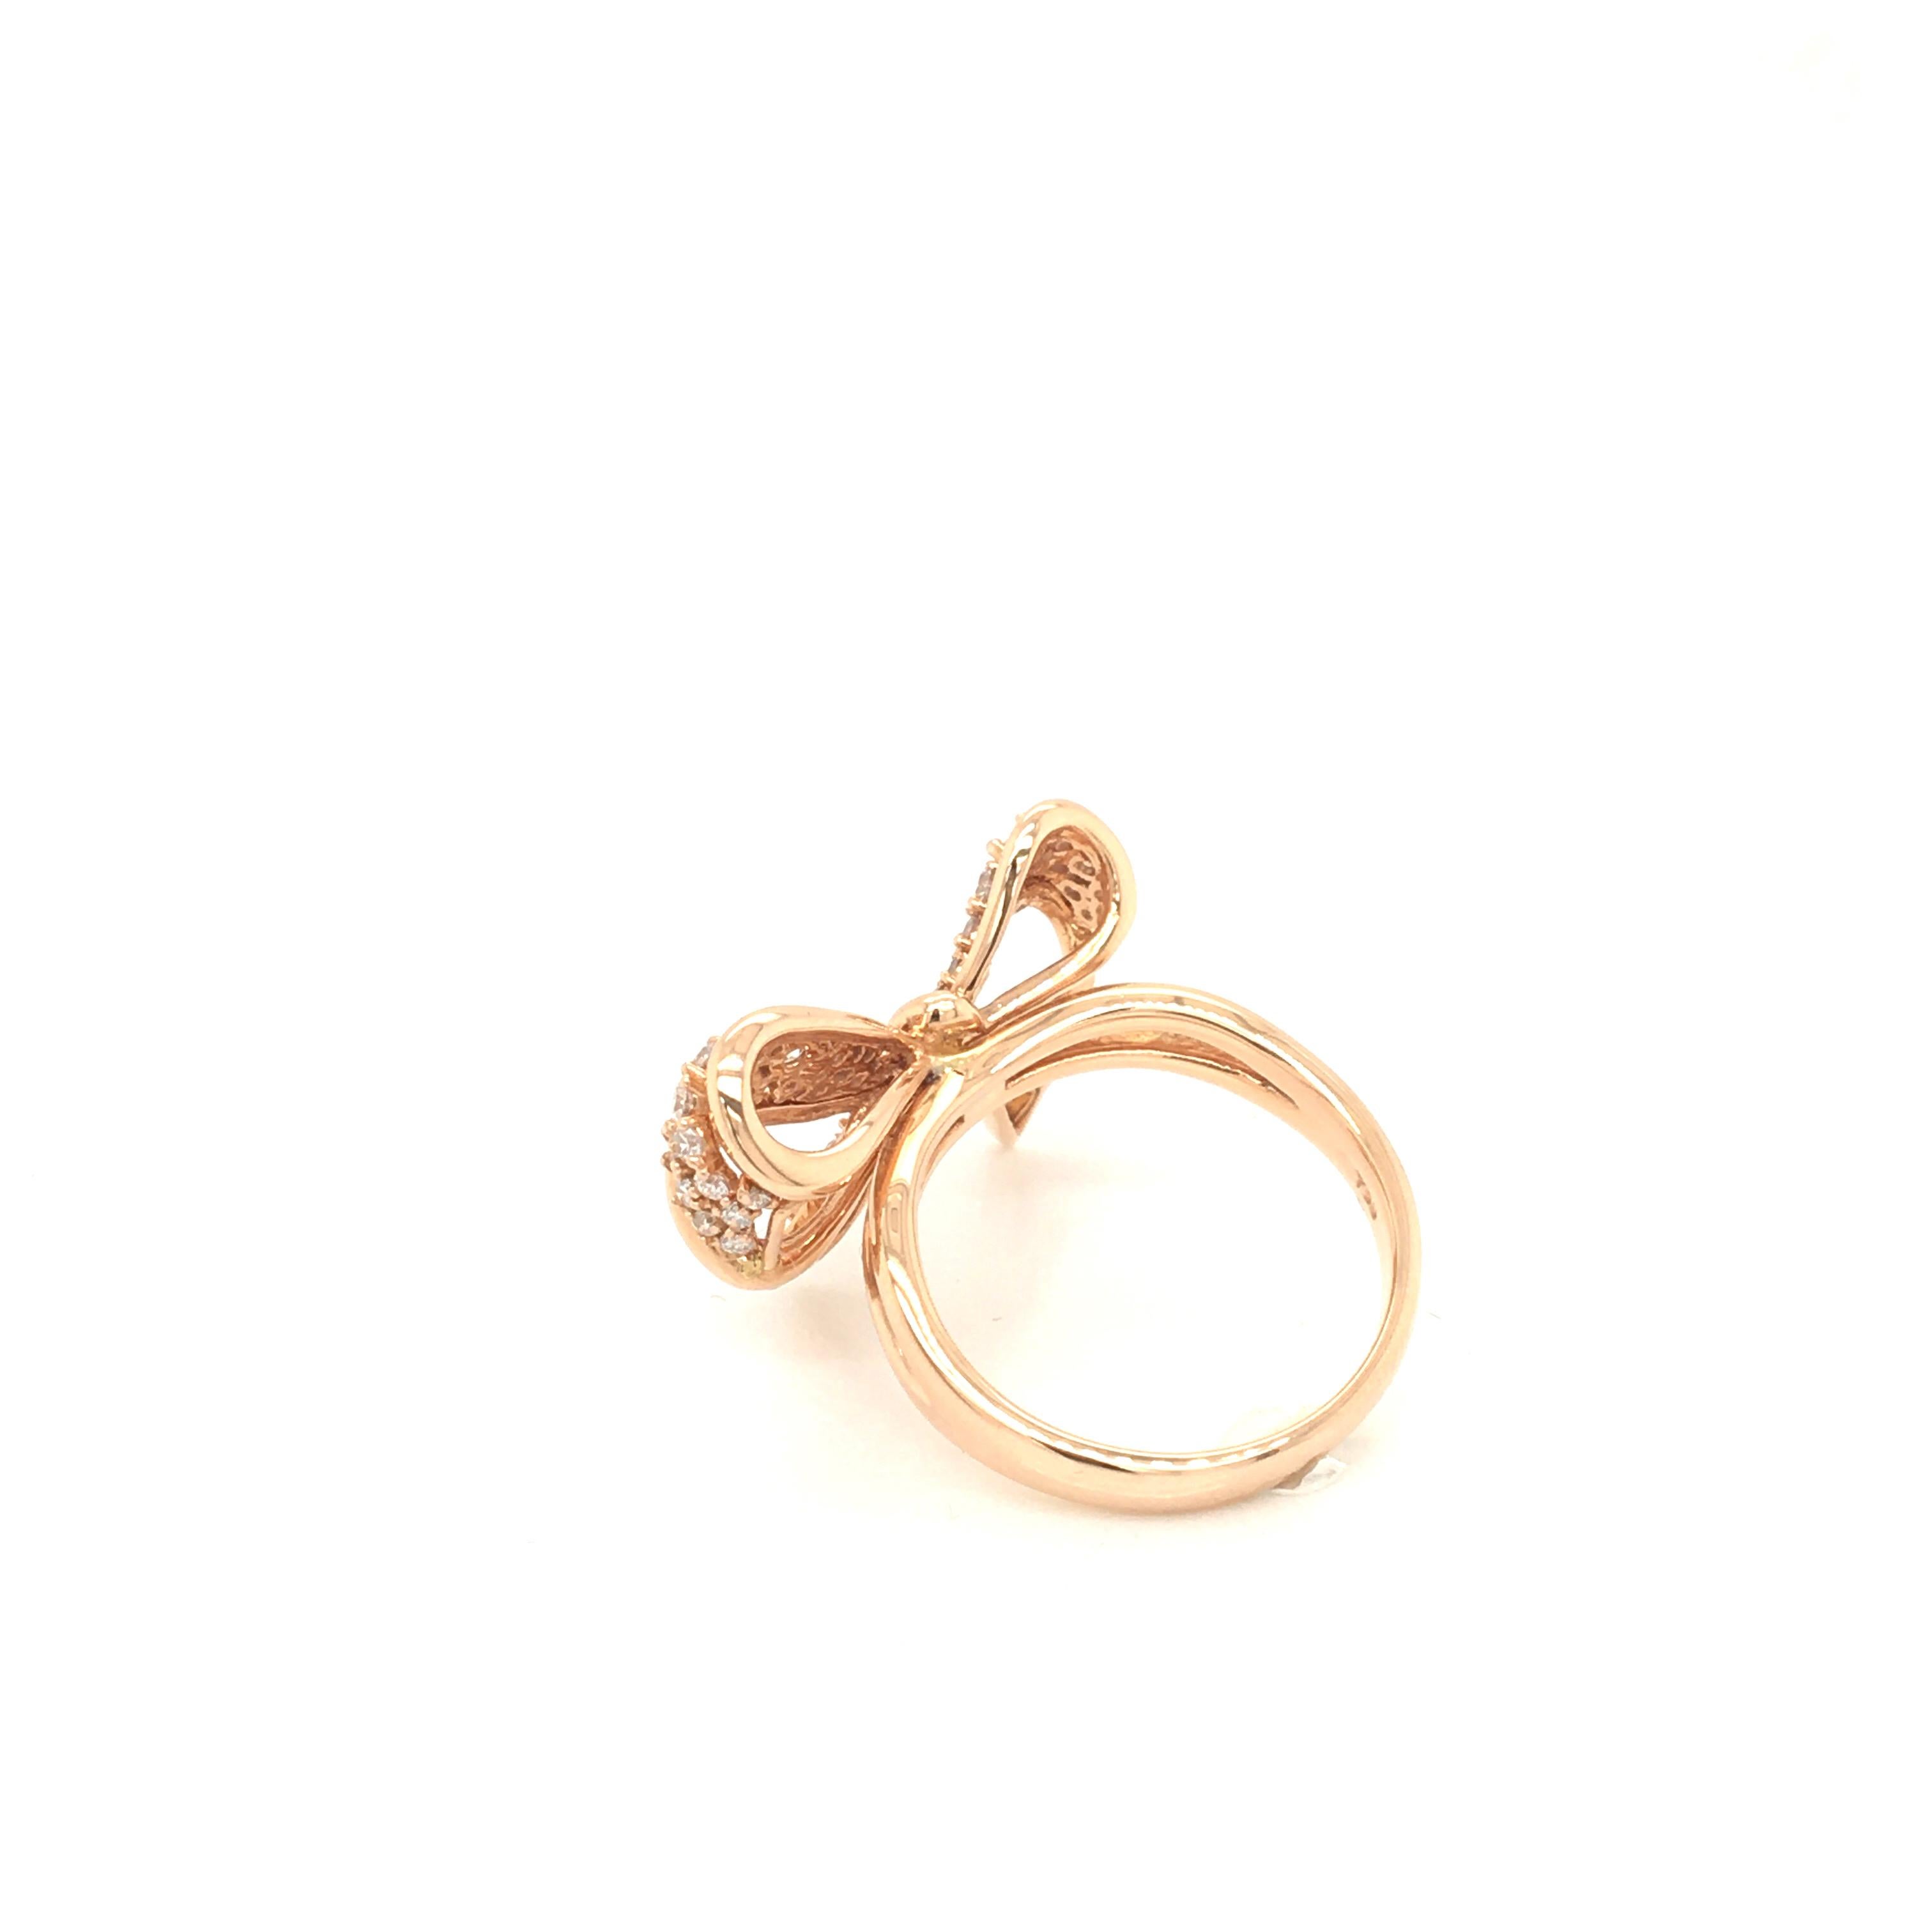 18 KT rose gold Ring, designed as a Bow
set with 0.61 cts of round cut diamonds color G clarity VS
Made in Italy comes in a Box
finger size 14 italian size (adjustable)
comes in a set with Bow pendent